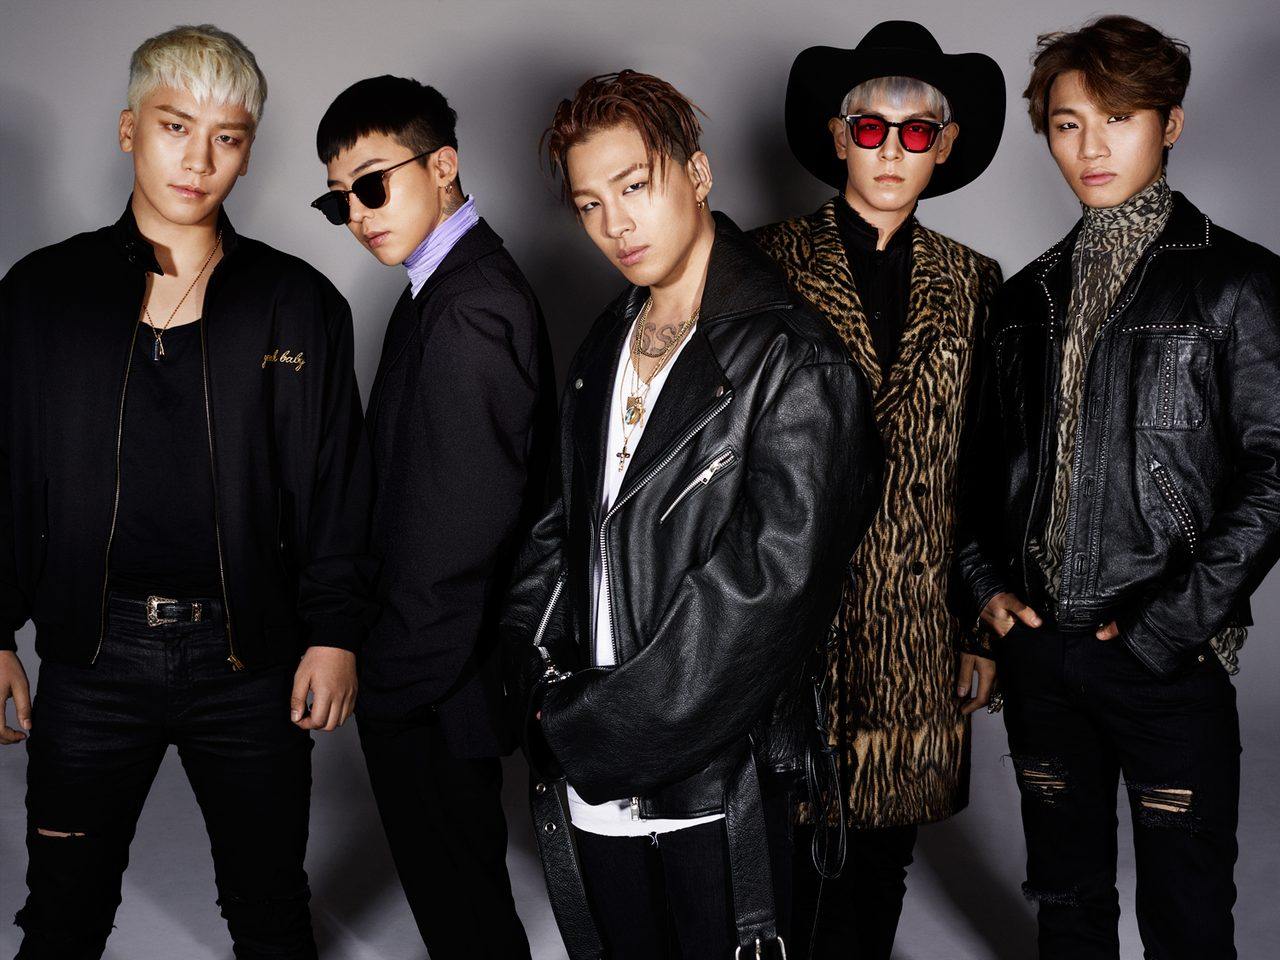 BigBang at the height of their fame, with now-disgraced Seungri second from right. Photo: Handout